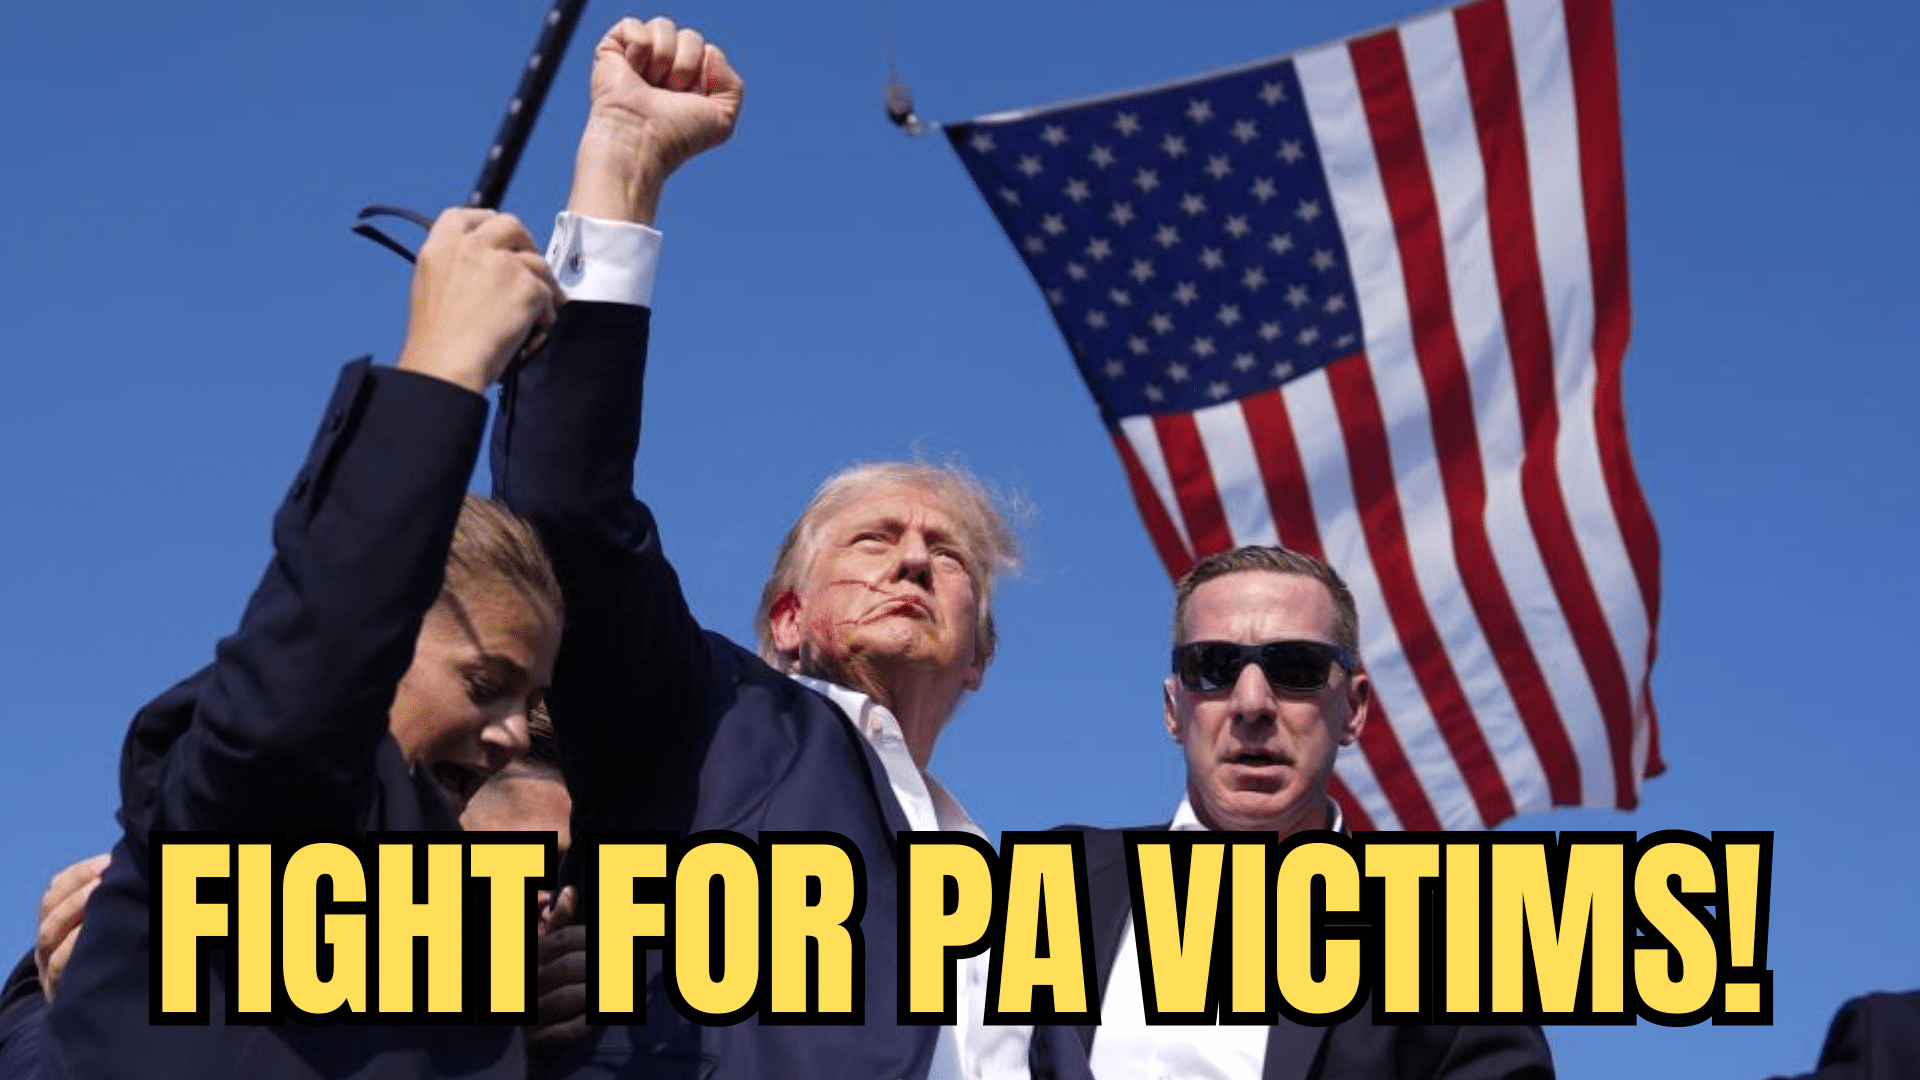 Fight For PA Victims!